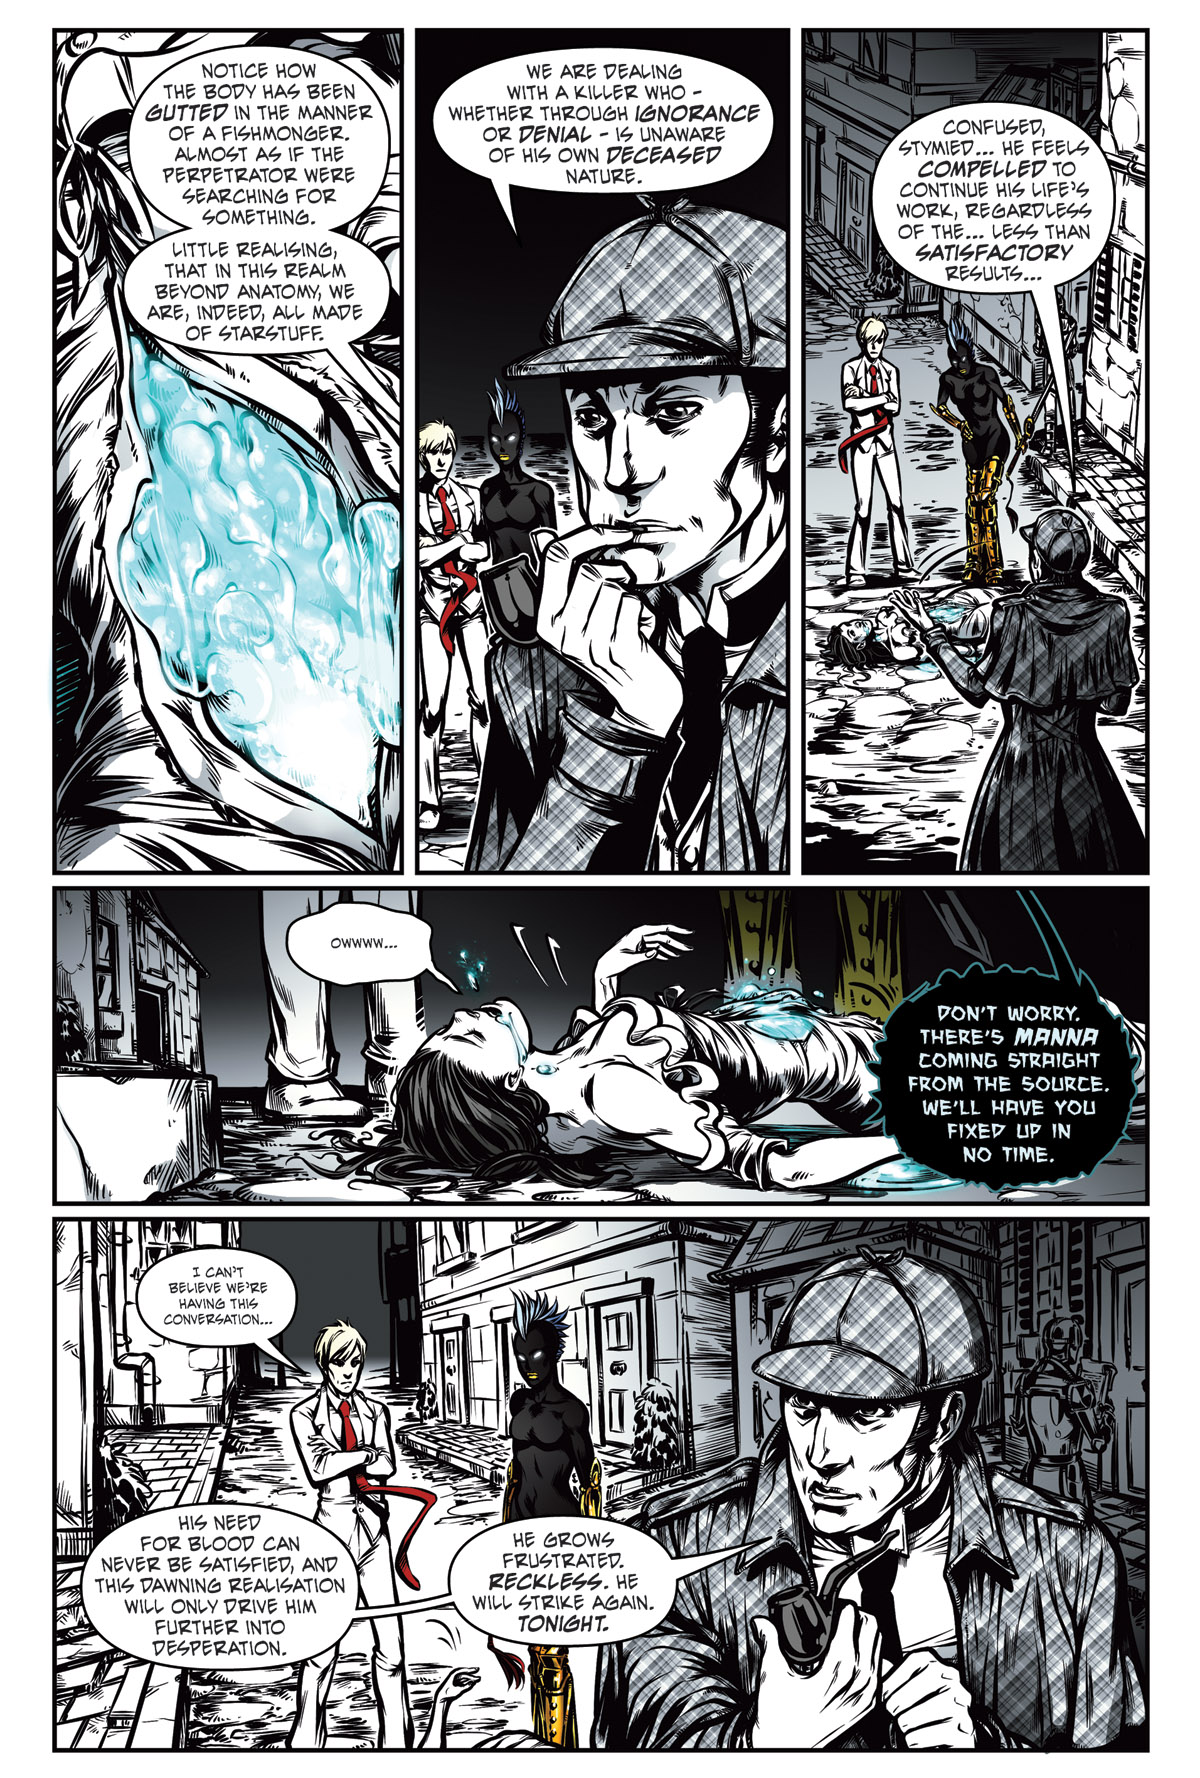 Afterlife Inc. | Elementary | Page 2